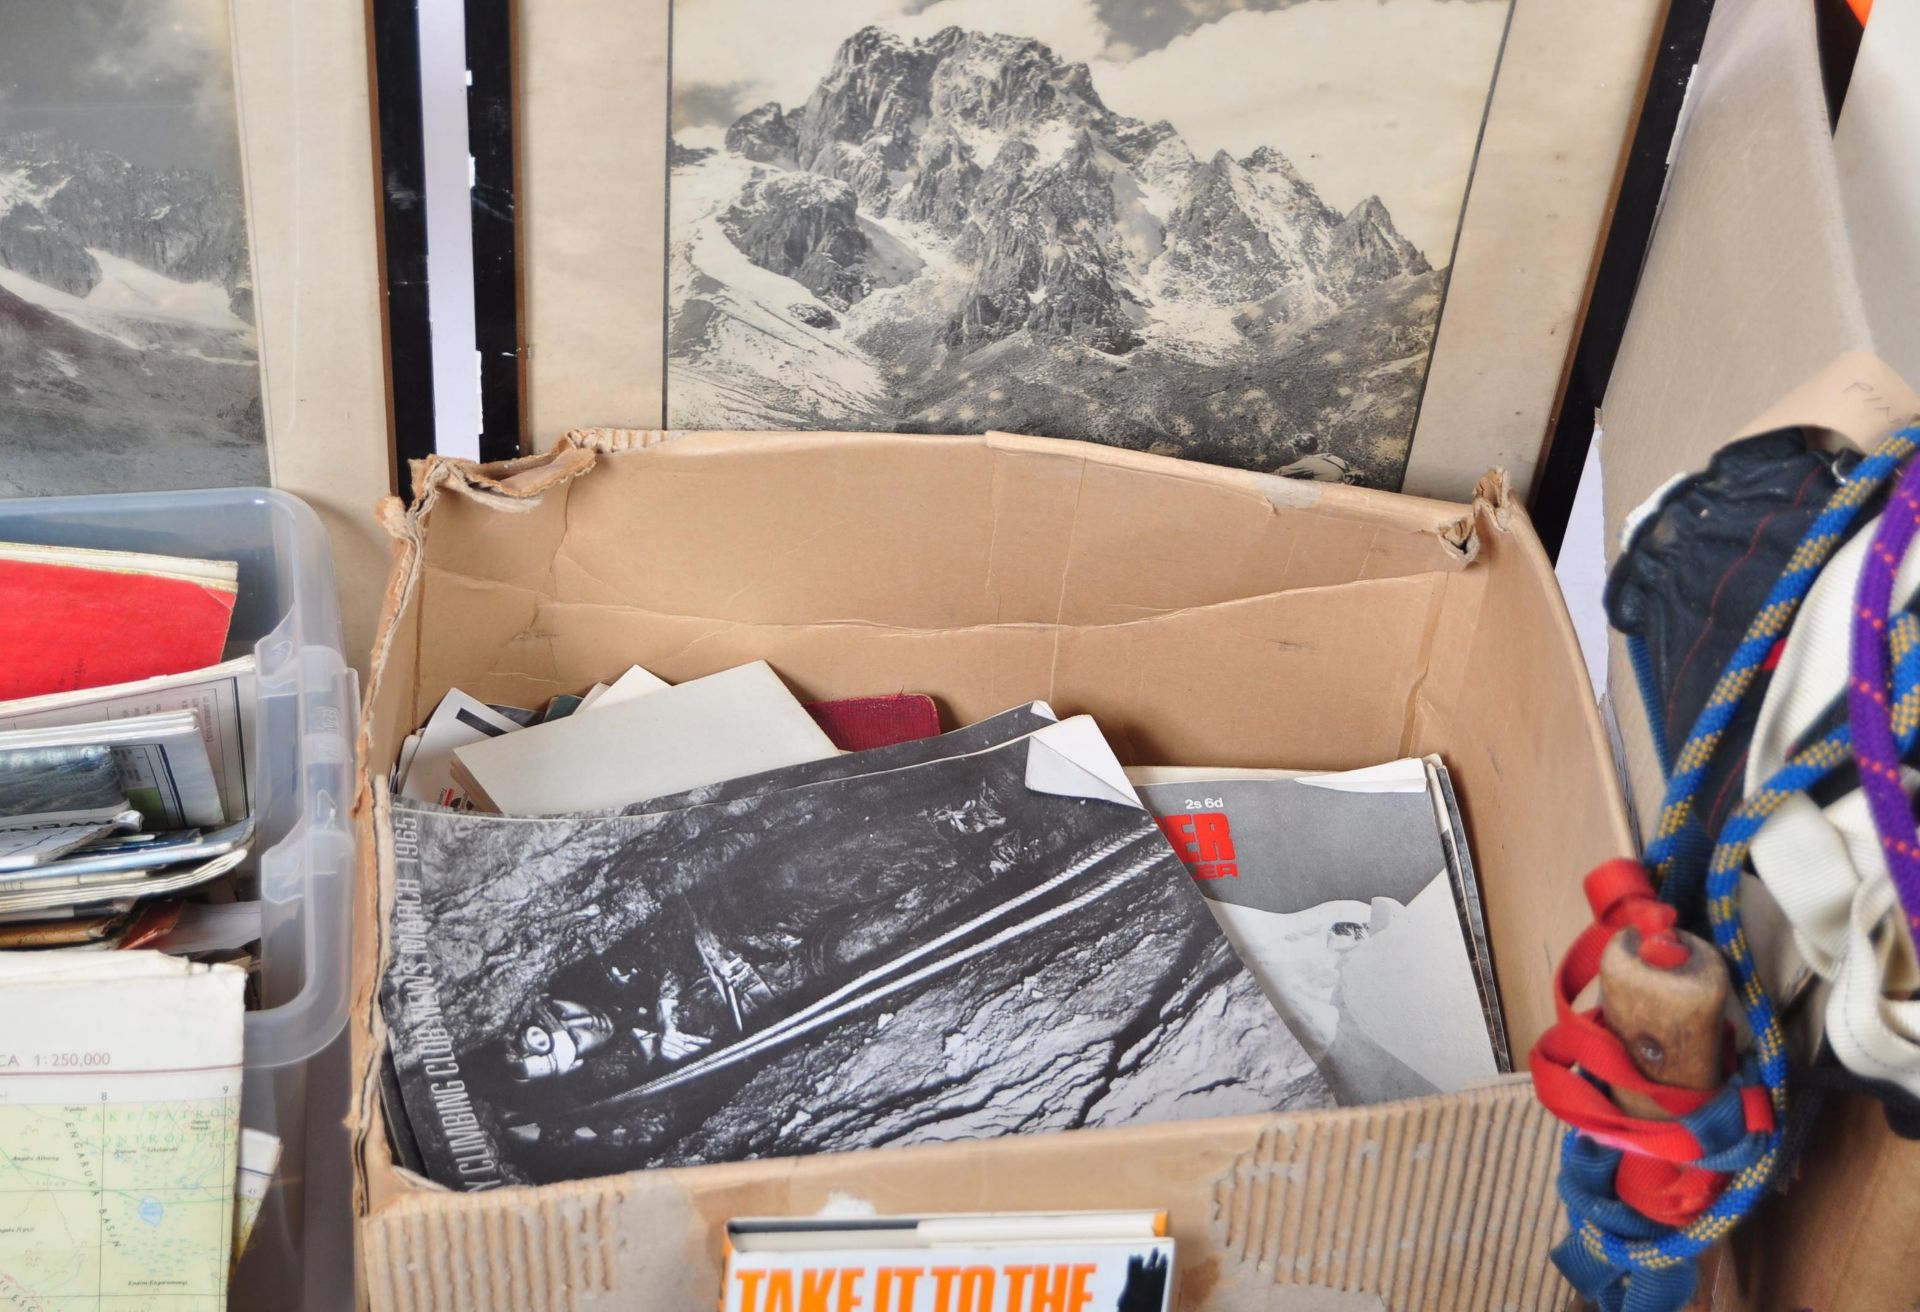 LARGE COLLECTION OF MOUNTAIN CLIMBING EPHEMERA & PERSONAL ITEMS - Image 3 of 11